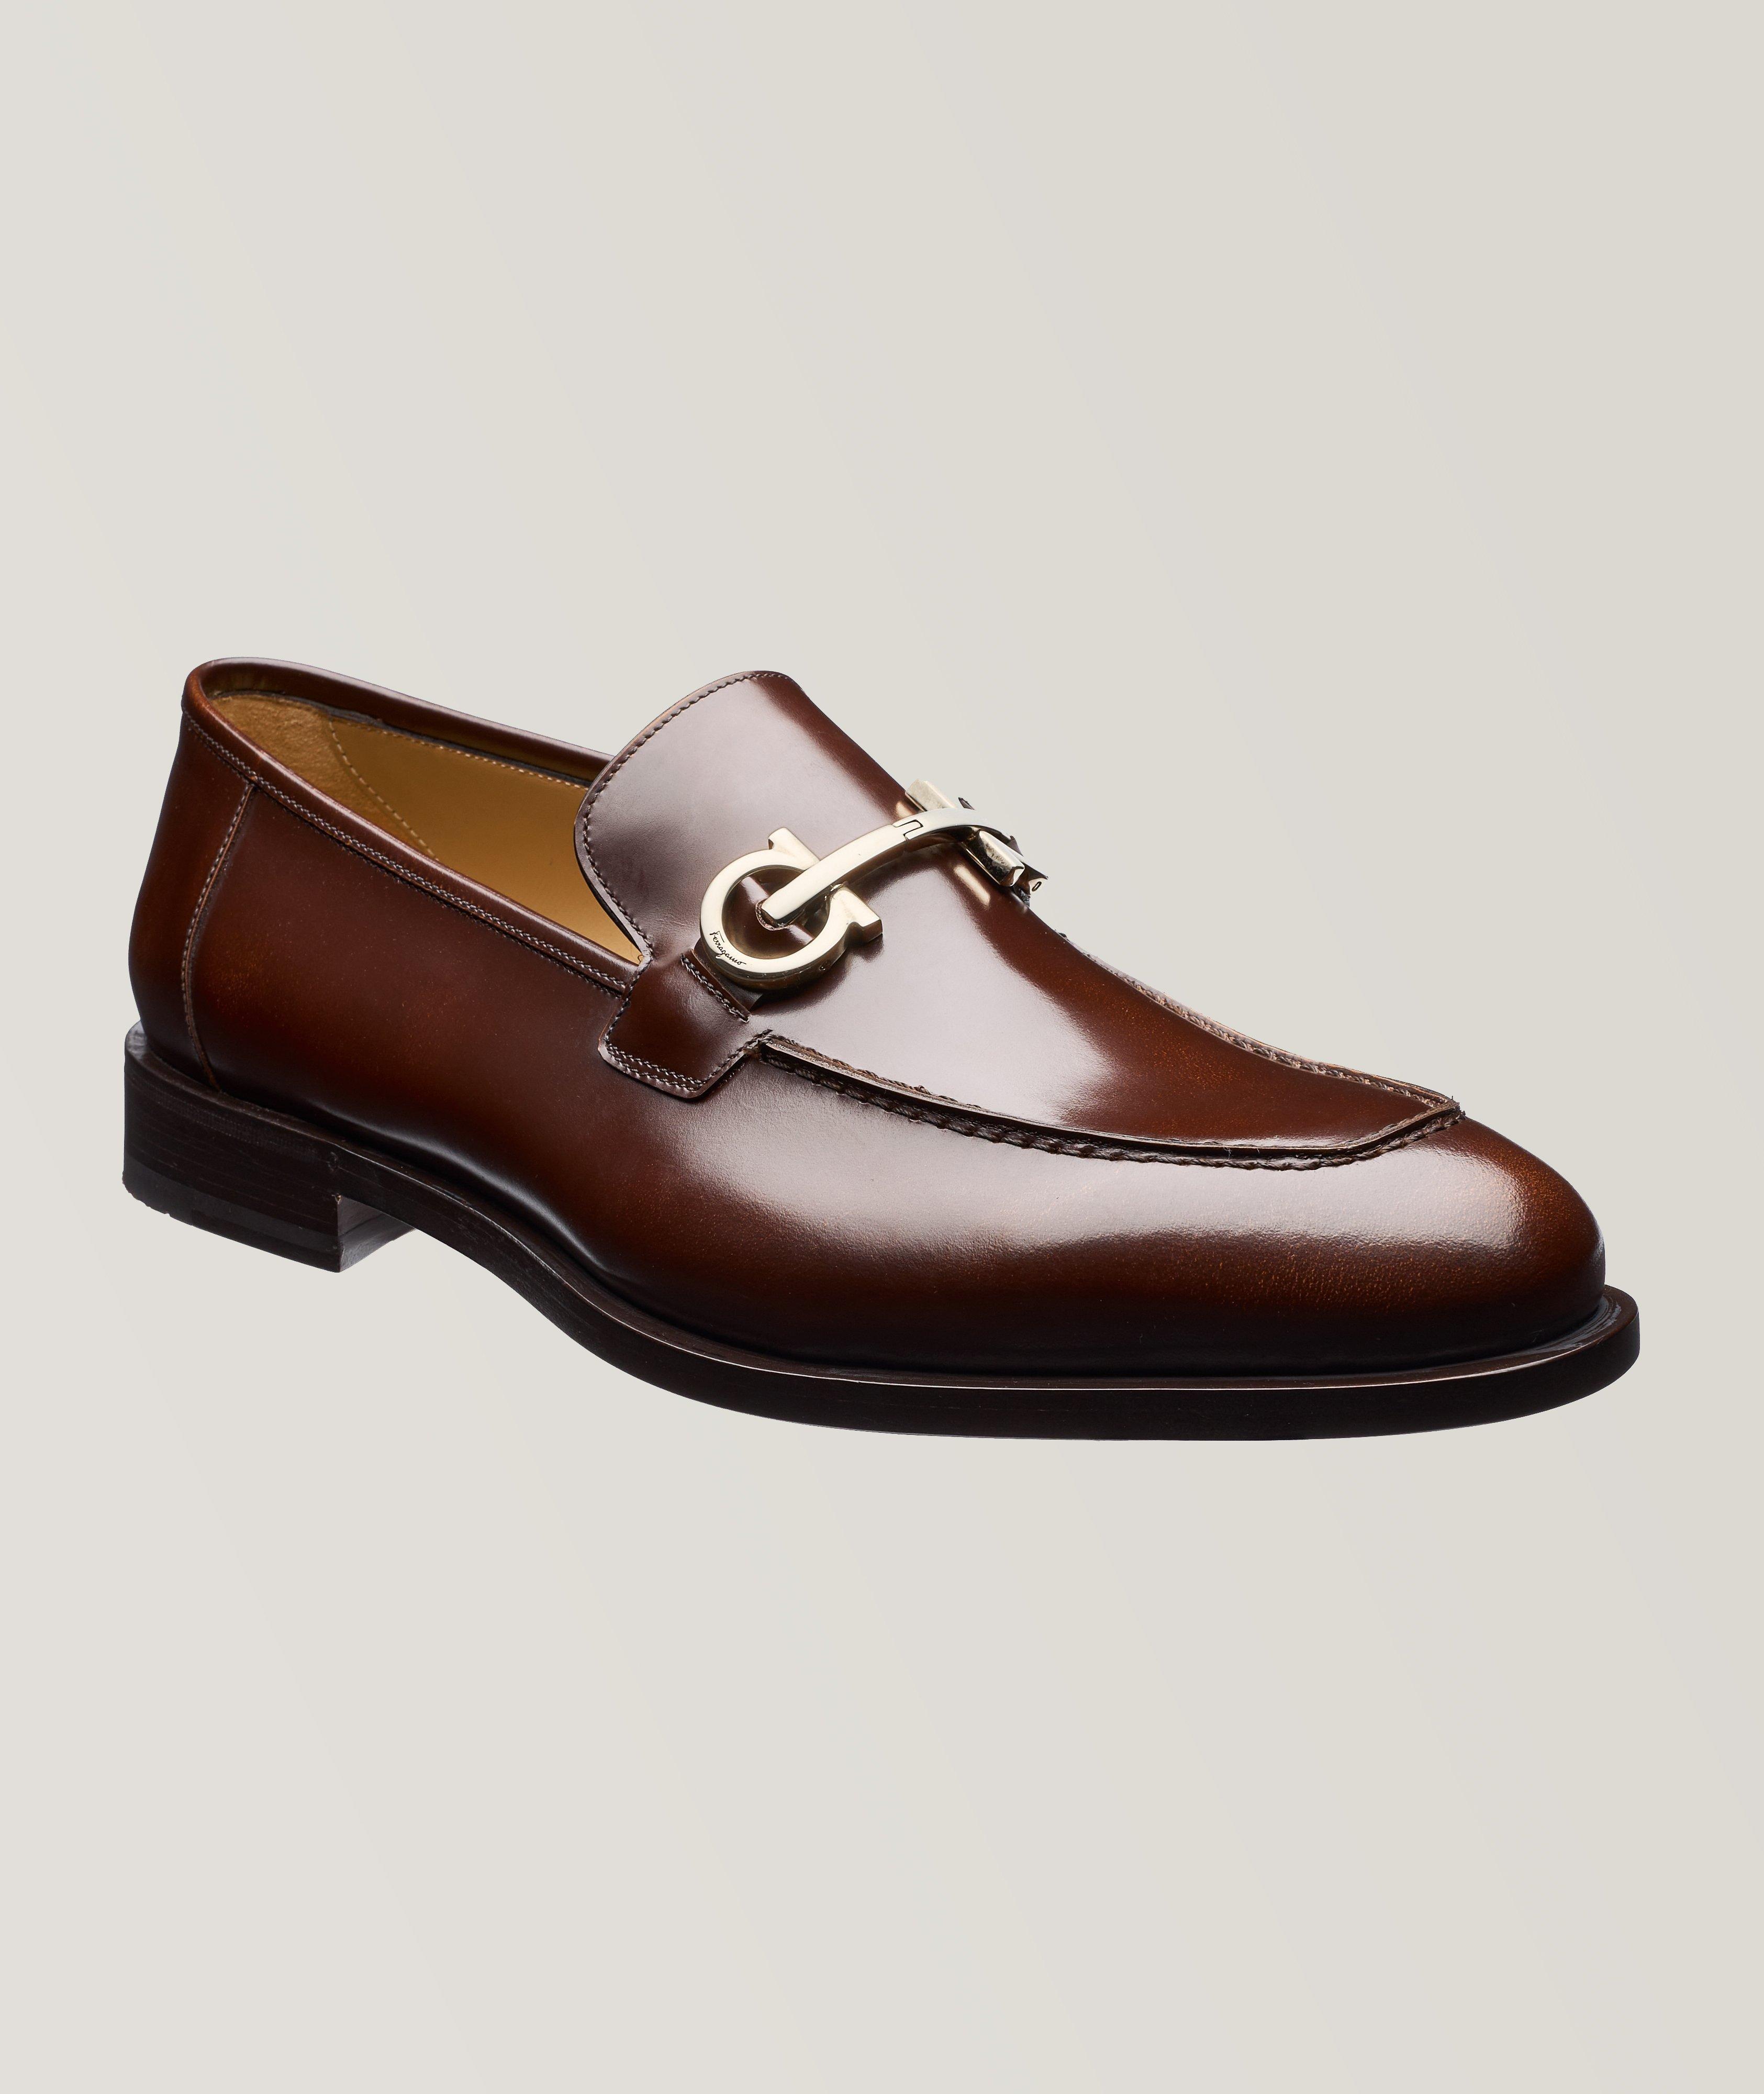 Gancini Patent Leather Loafers image 0